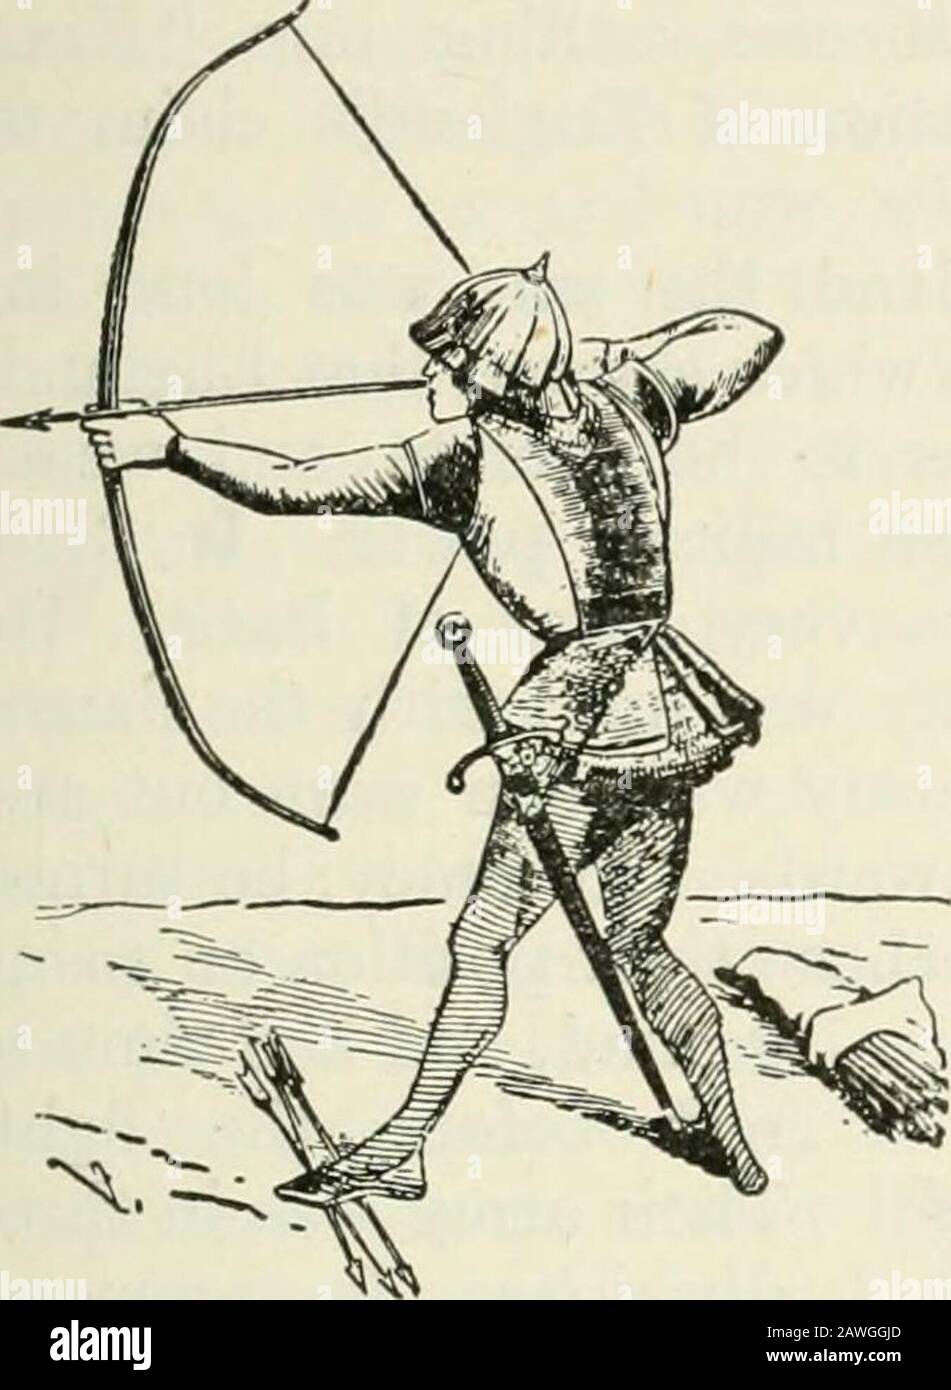 Ontario High School History of England . he long-bow.Edward I had made it the great national weapon and hispeople developed amazing strength and skill in its use. Thelong-bowmen shot a steel-pointed arrow which couldpenetrate thick planks of oak, and even plate armour; it ison record that an arrow pierced the mail shirt, the mailbreeches, the thigh^ and the wooden saddle of a rider, andsank deep into his horses flank. To kill a horse with sucha shaft was not difficult. The fire of the long-bow wasmore rapid than that of the musket of a later time; it wasdeadly at a range of two hundred yards o Stock Photo